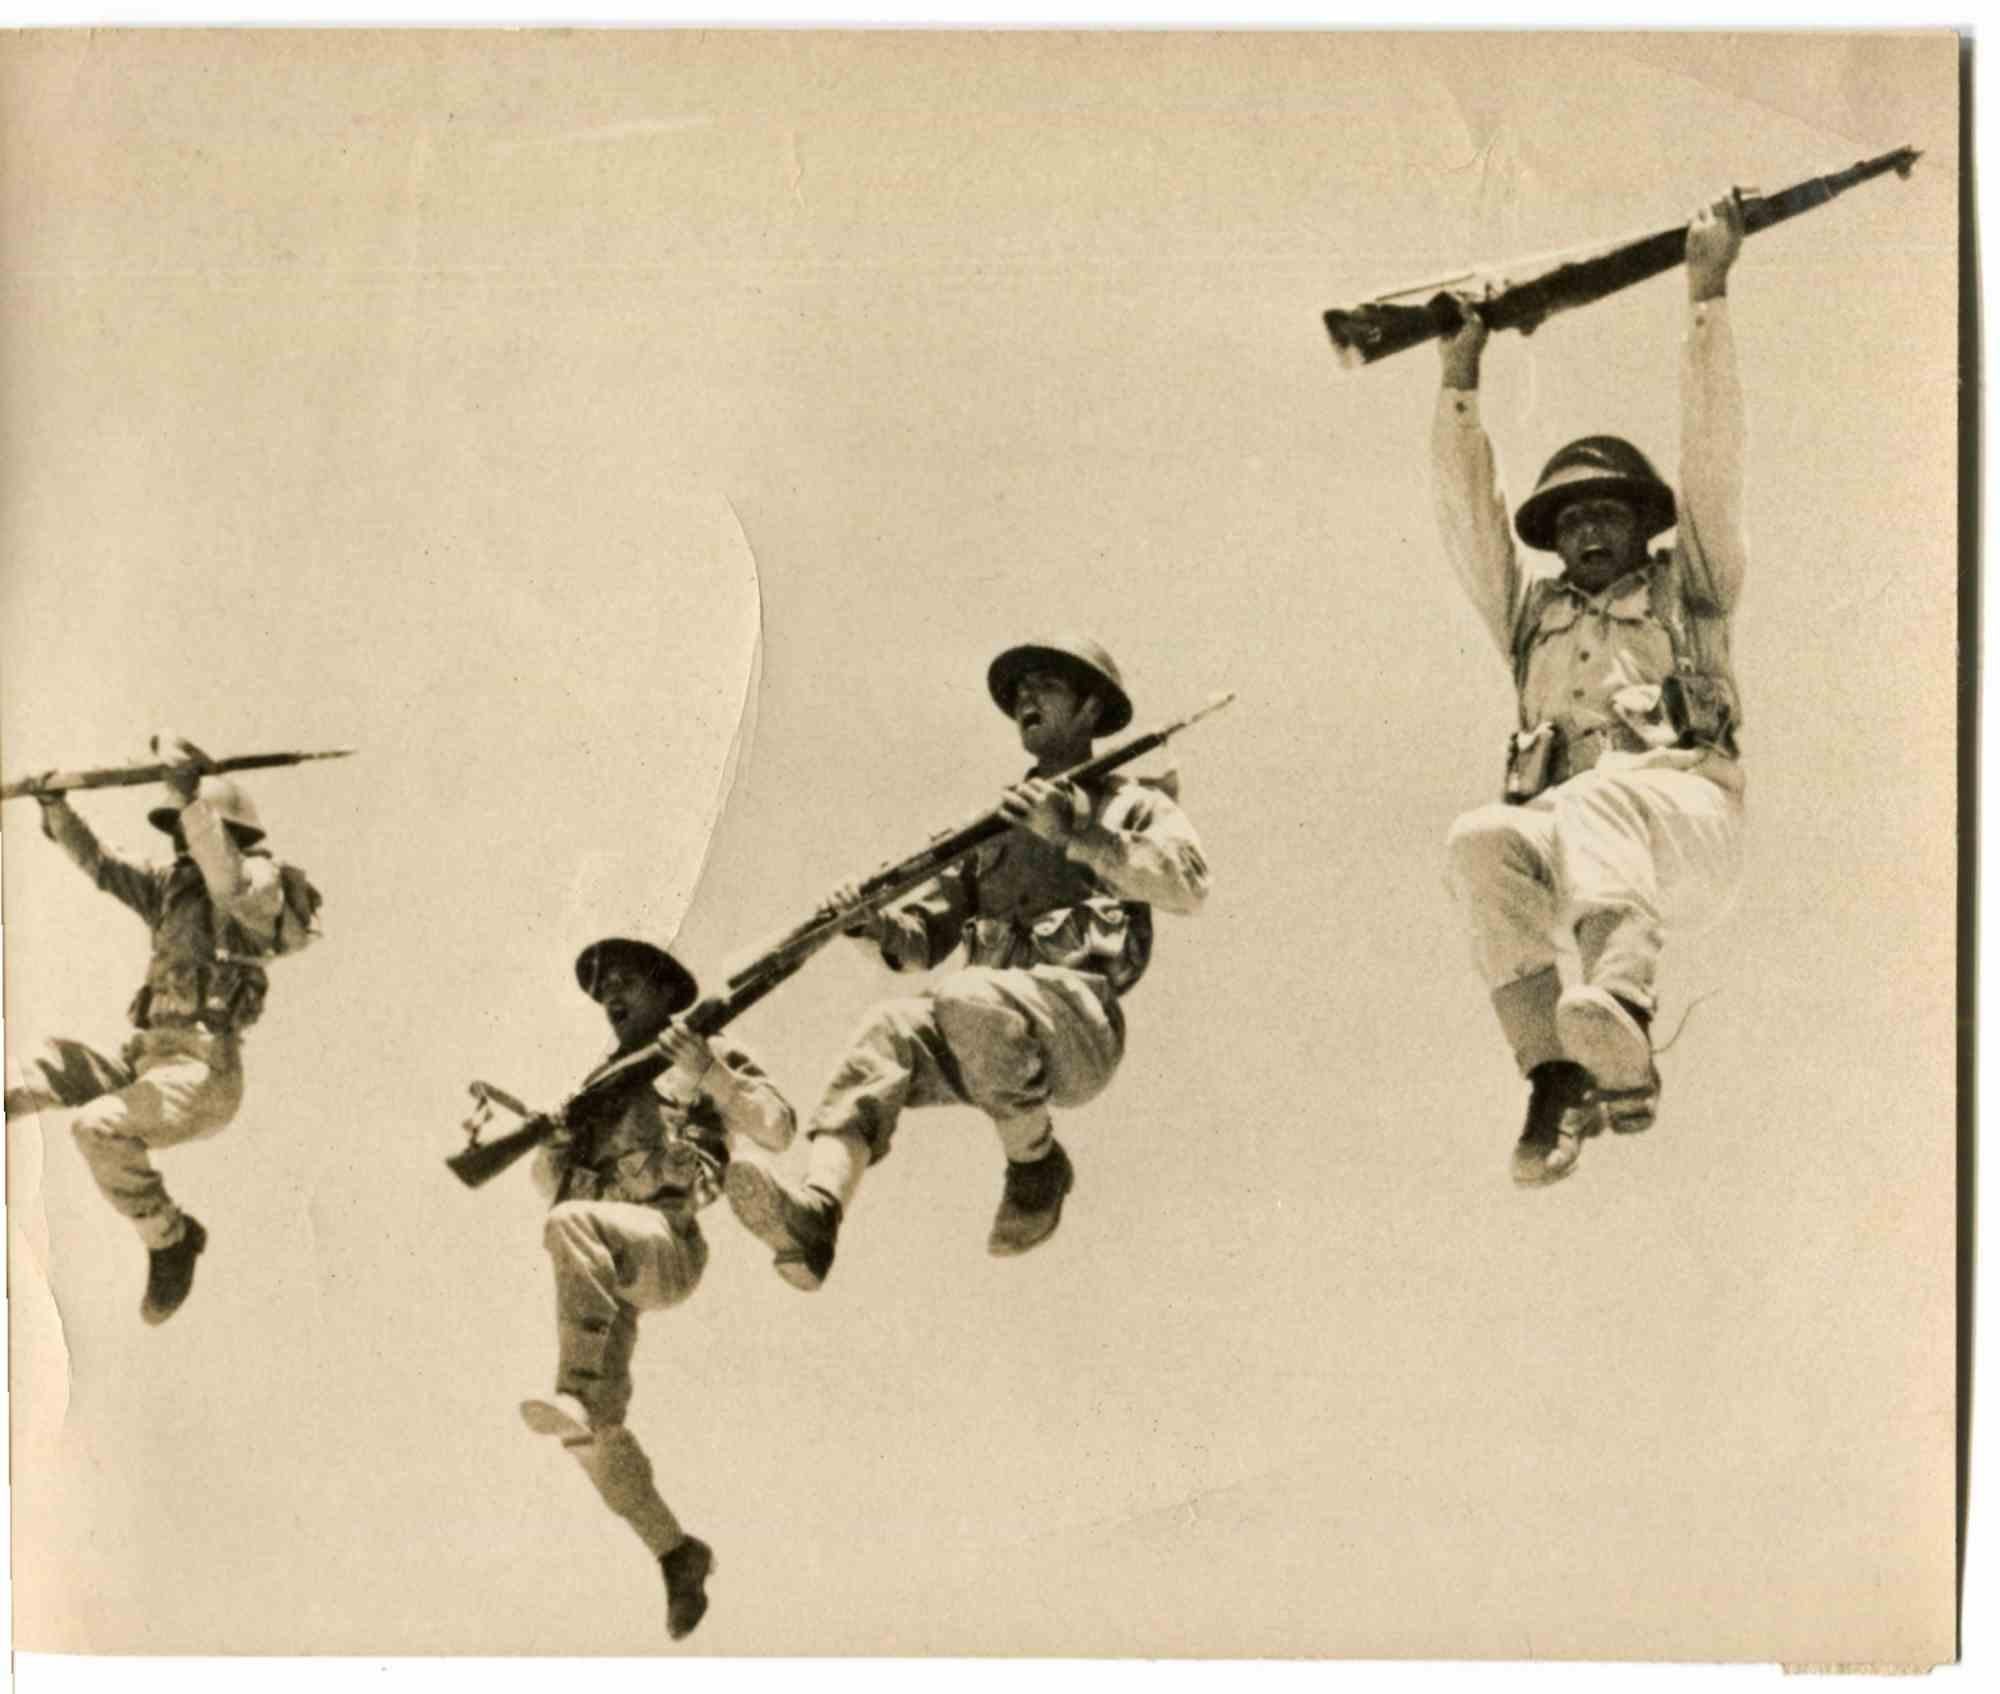 Unknown Portrait Photograph - Jumping During Military Training - Mid-20th Century